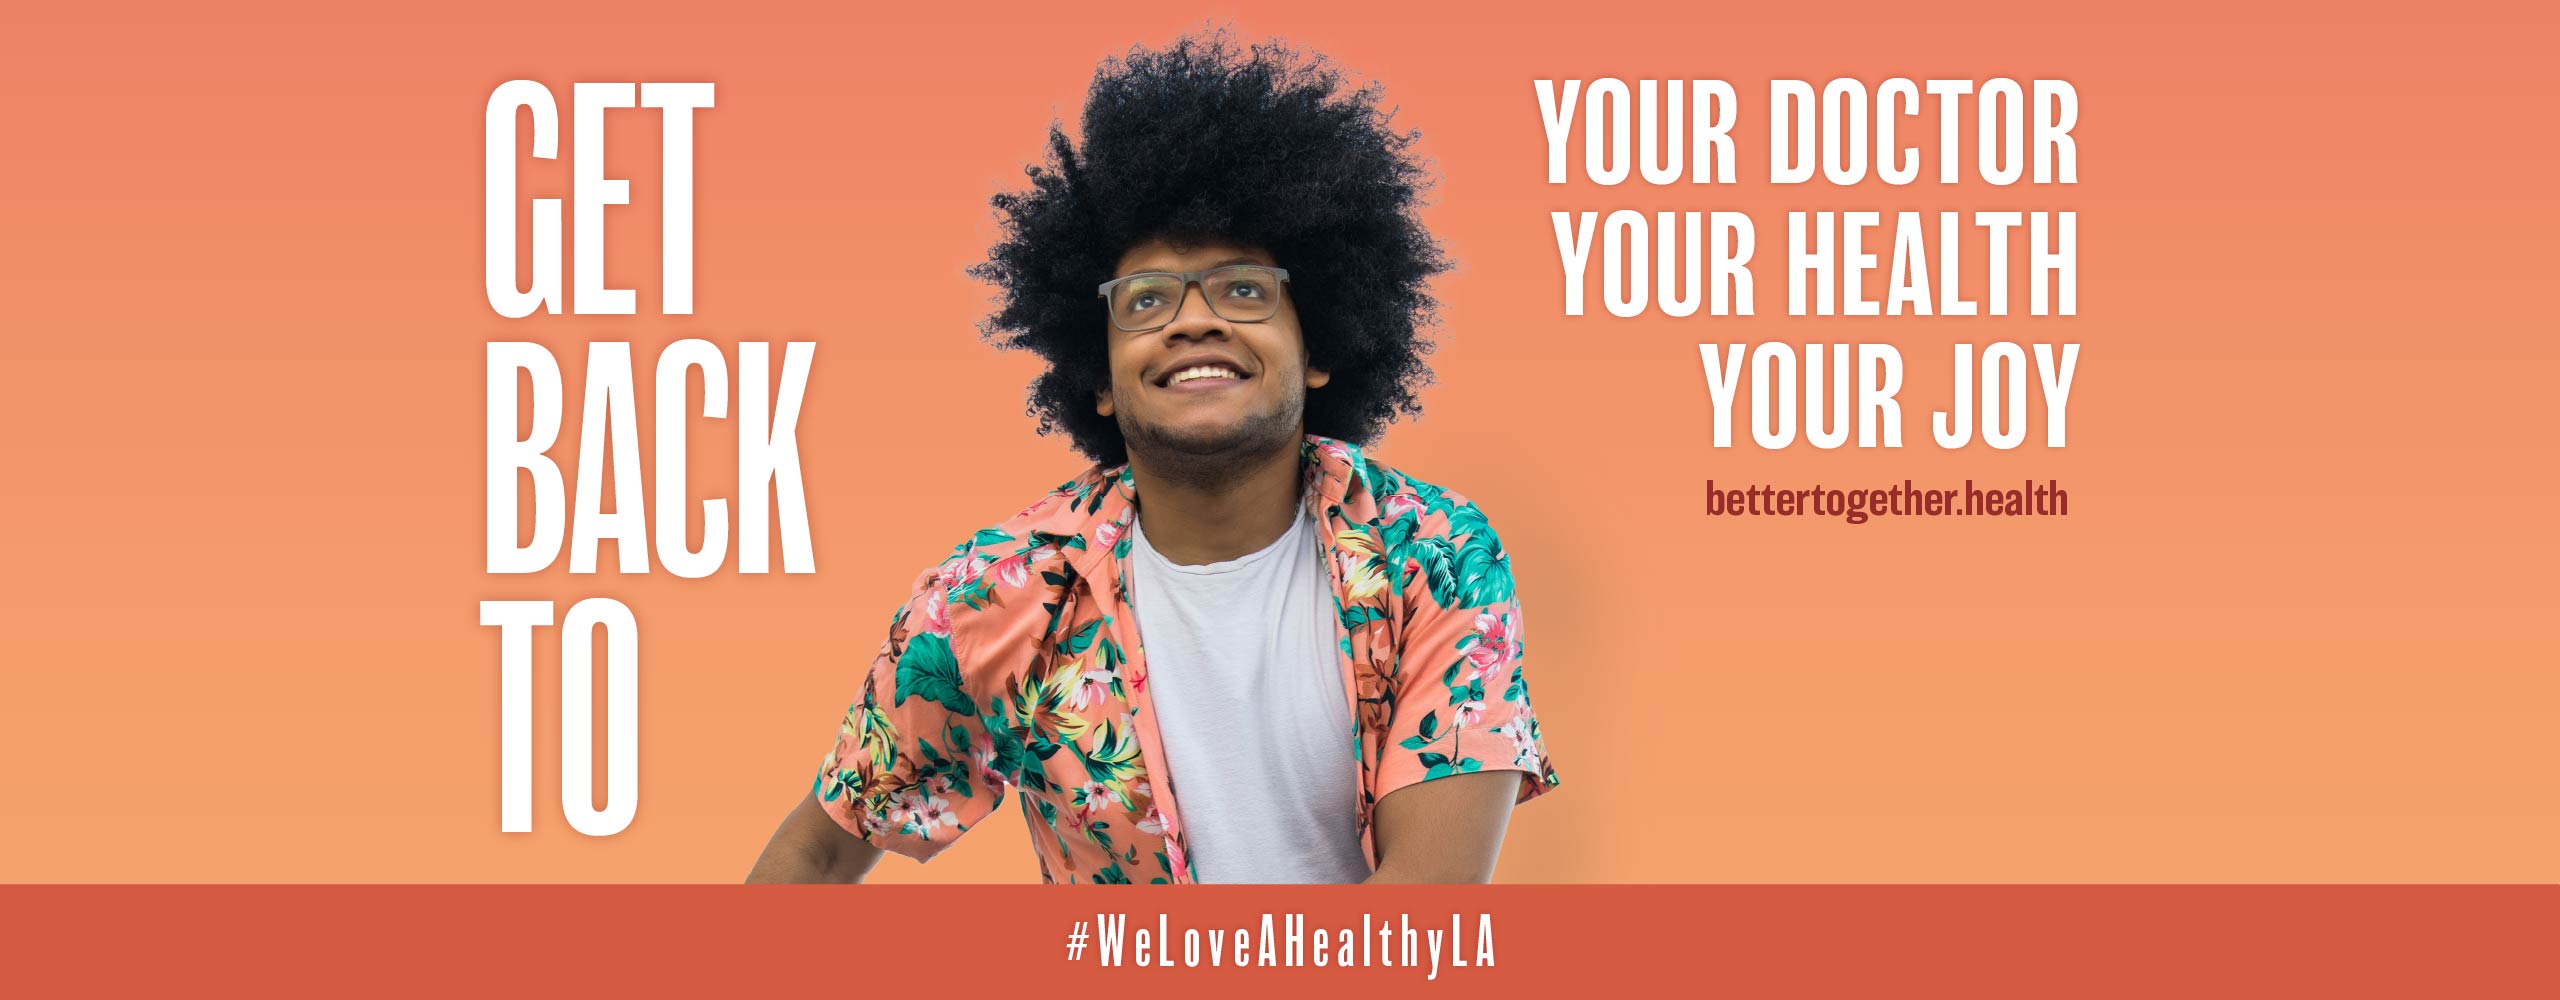 Words: Get Back to your doctor, your health, your joy. Man smiling - #WeLoveAHealthyLA